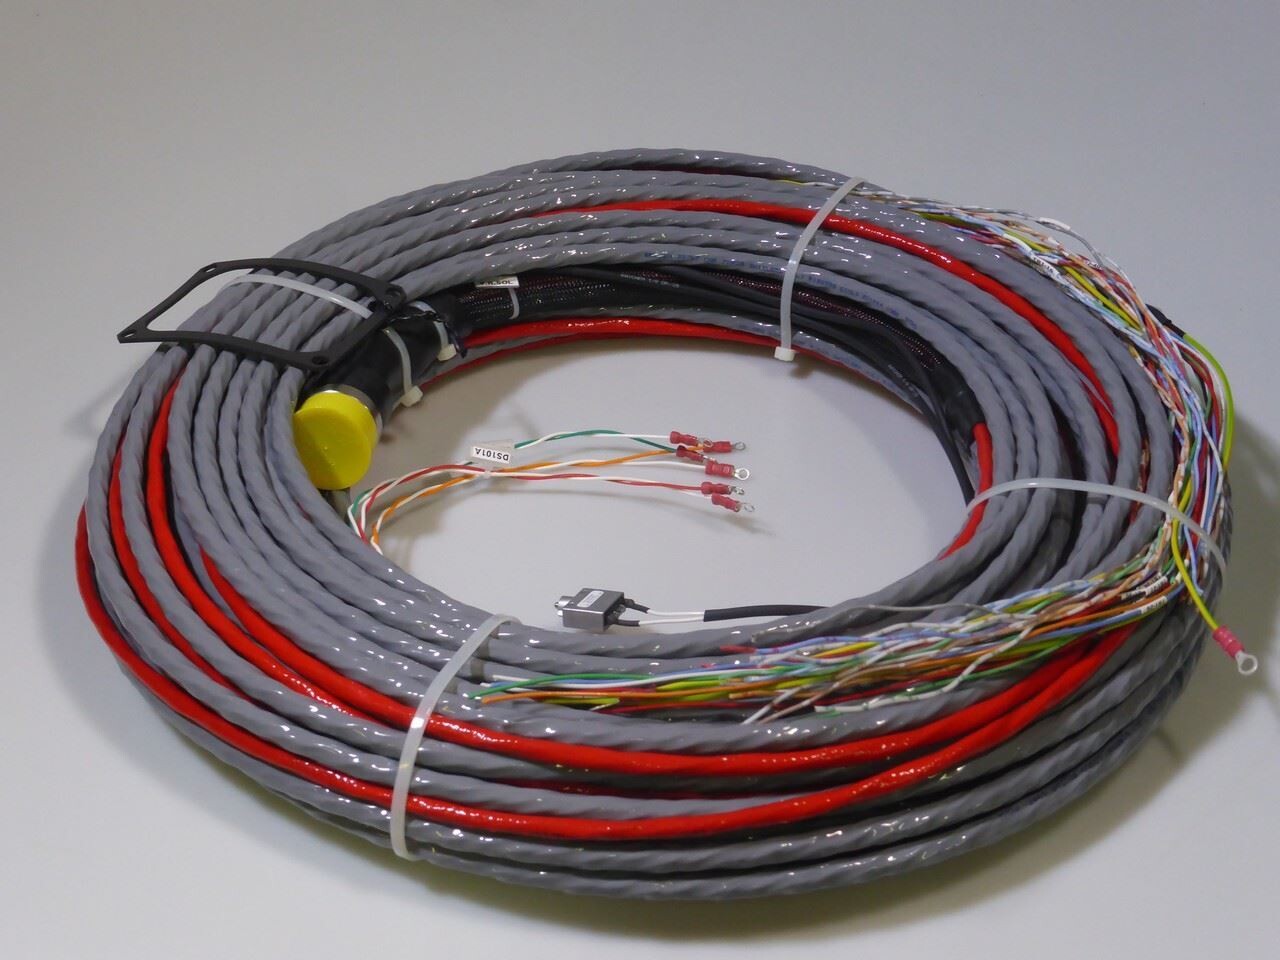 Cable assy Receiver 22,86 m long